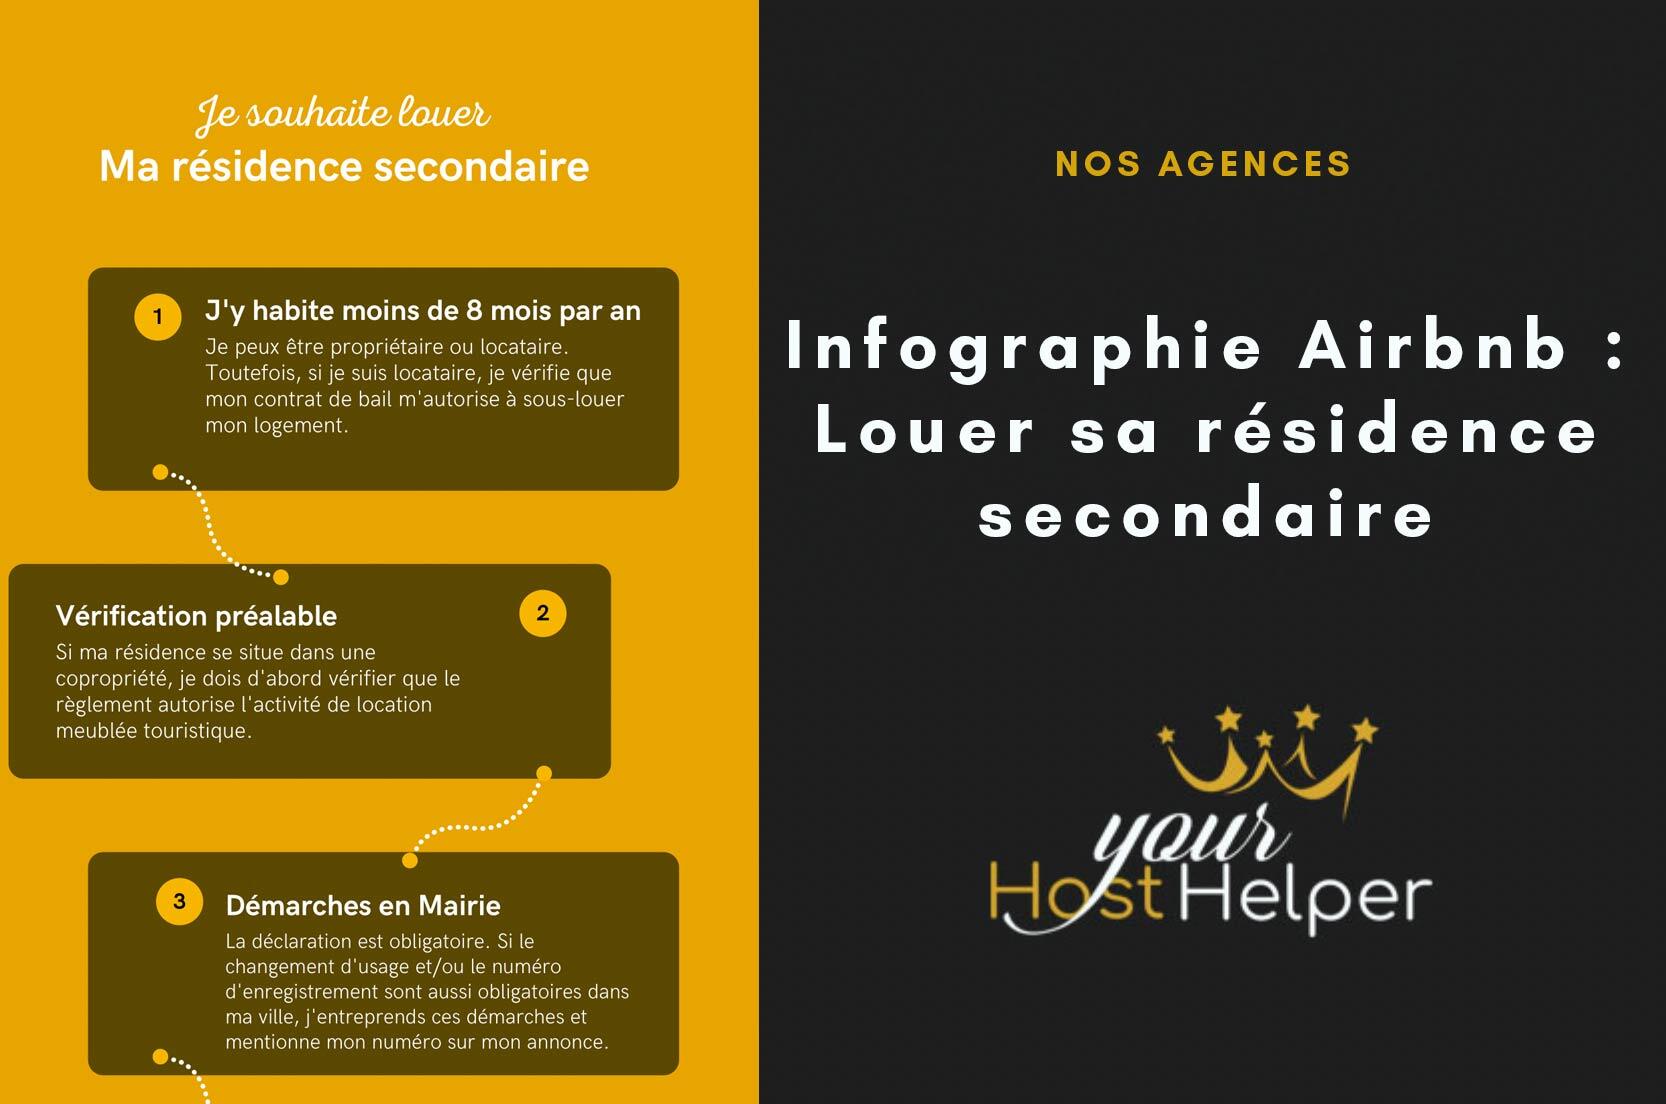 You are currently viewing Infographie Airbnb : Louer sa résidence secondaire